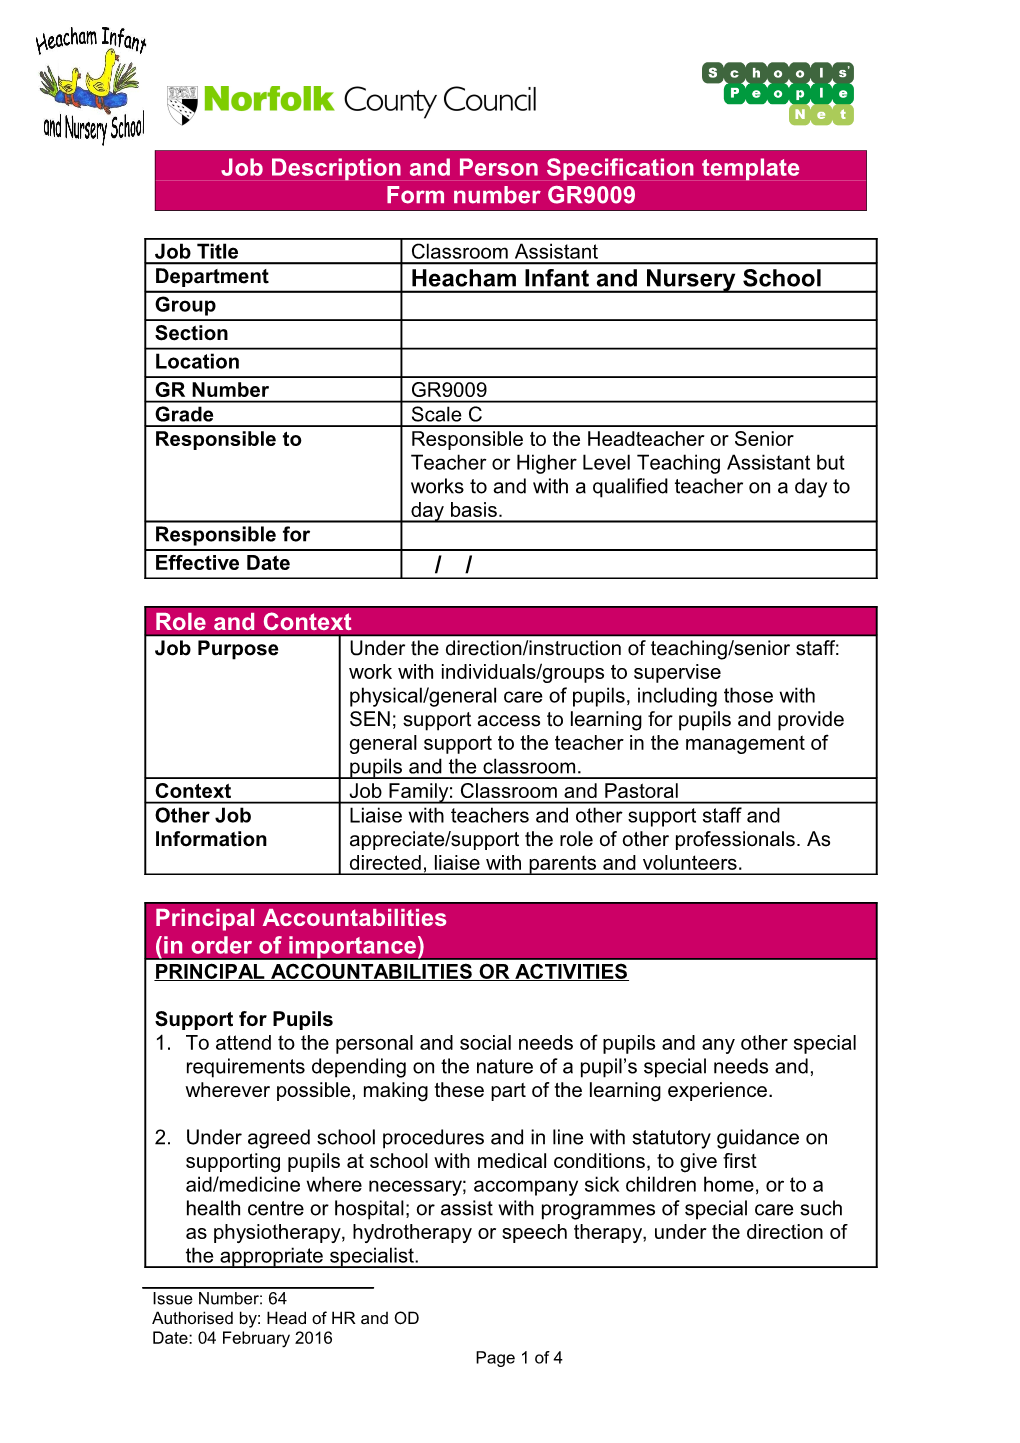 GR9009 Job Description and Person Specification Template Classroom Assistant (T9)